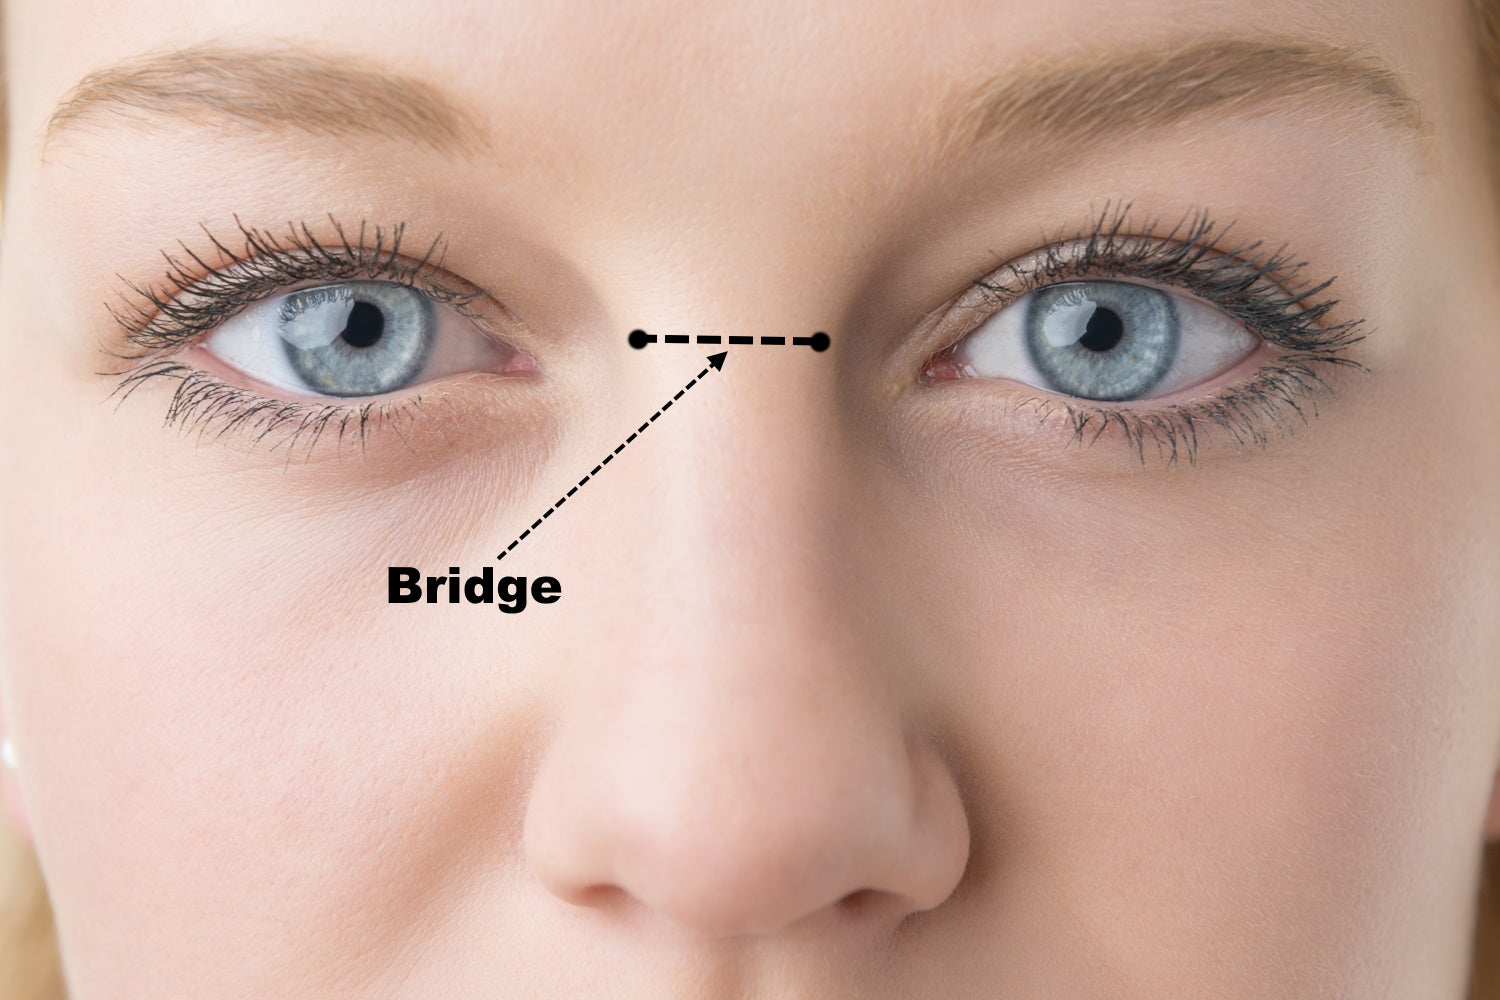 The location of a bridge nose piercing on a models nose between her eyes.